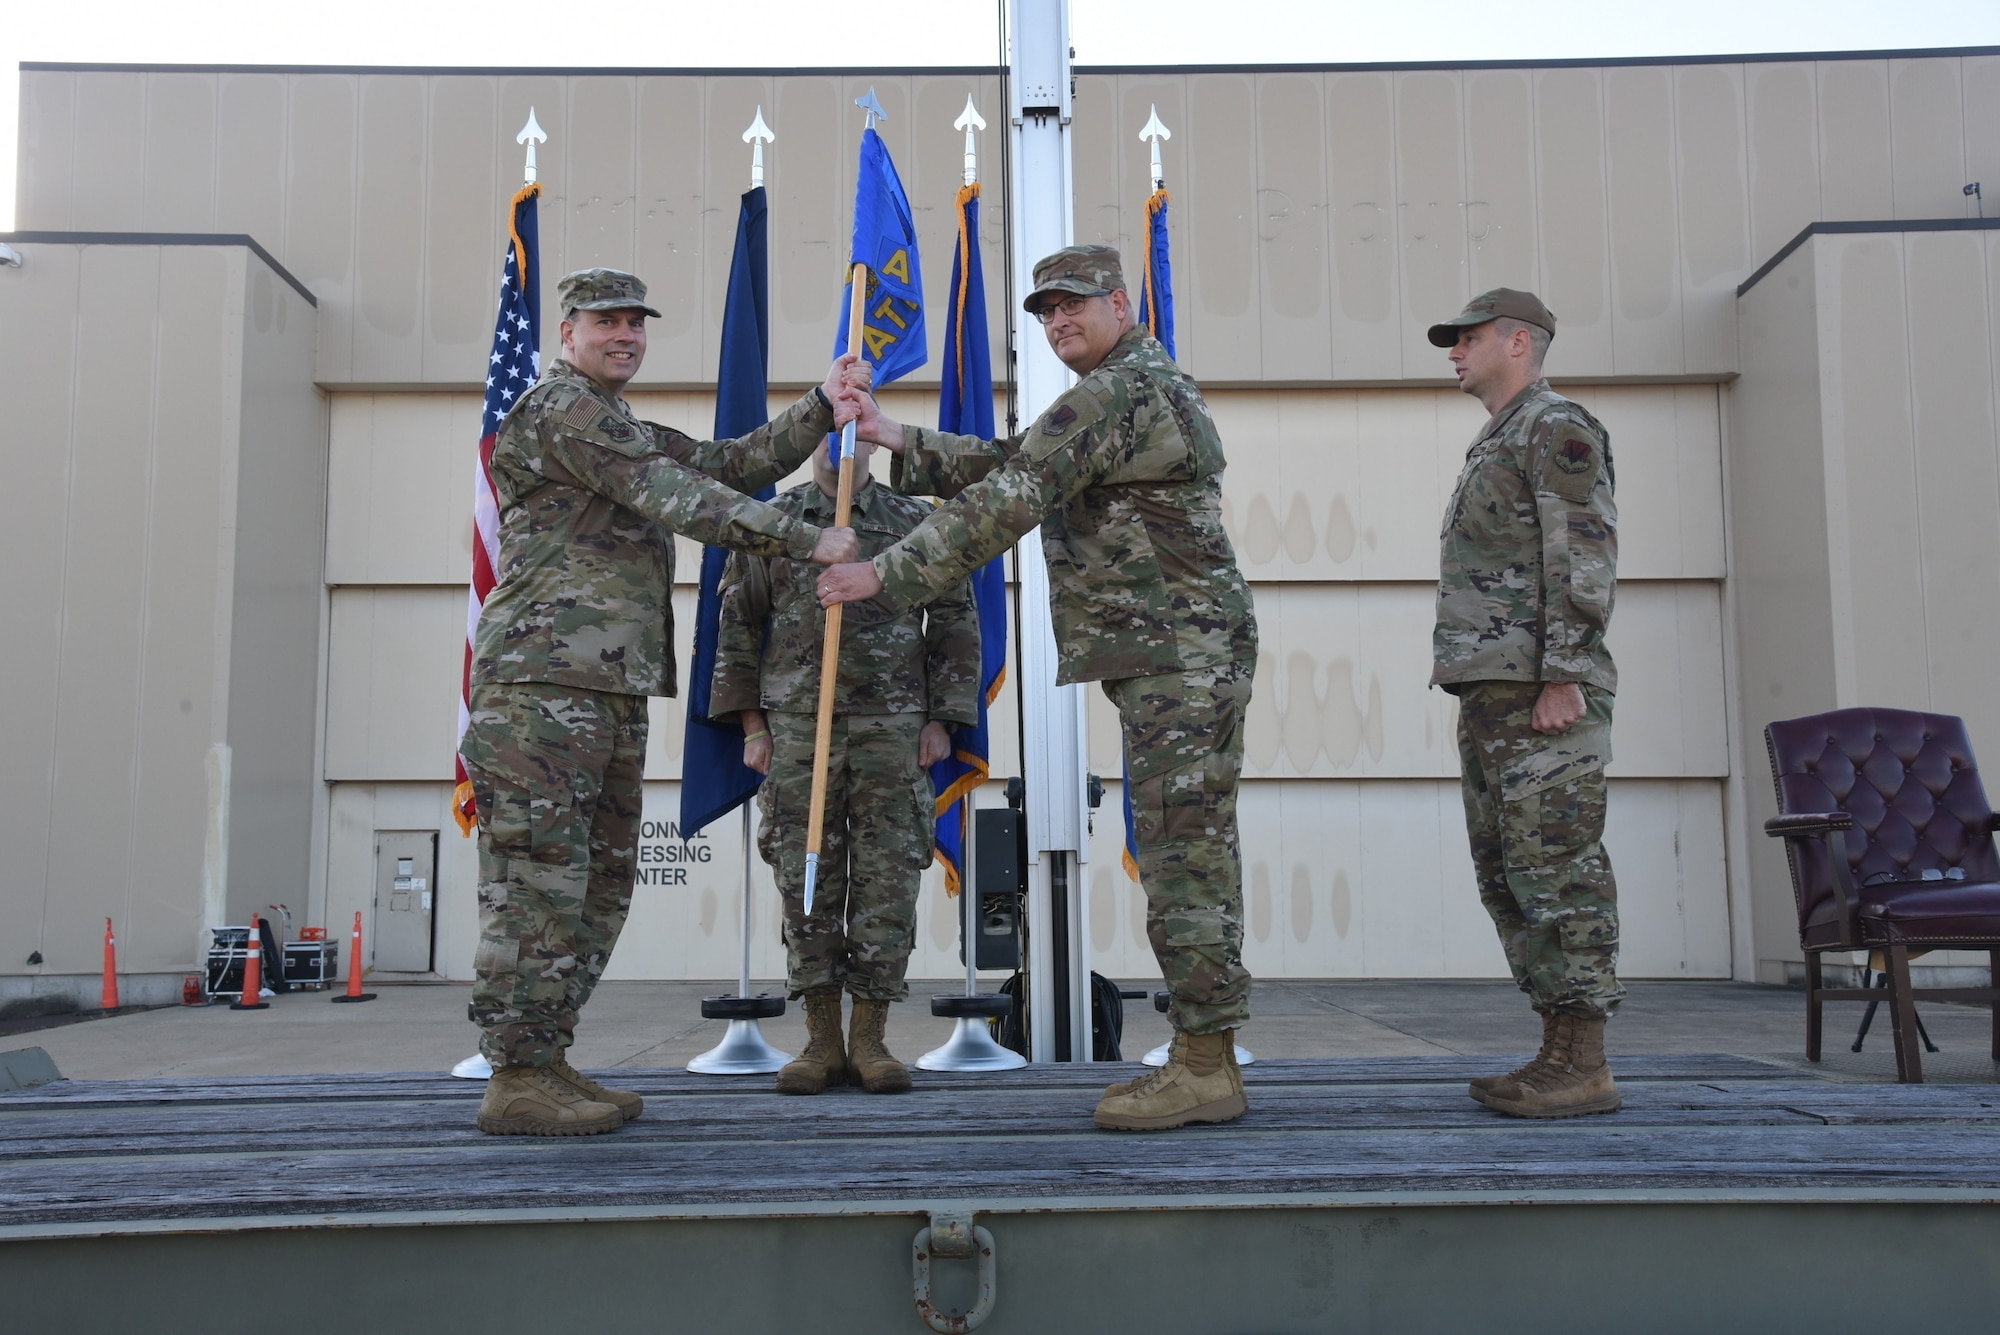 A man in an Air Force Uniform accepts a flag from another man in uniform.